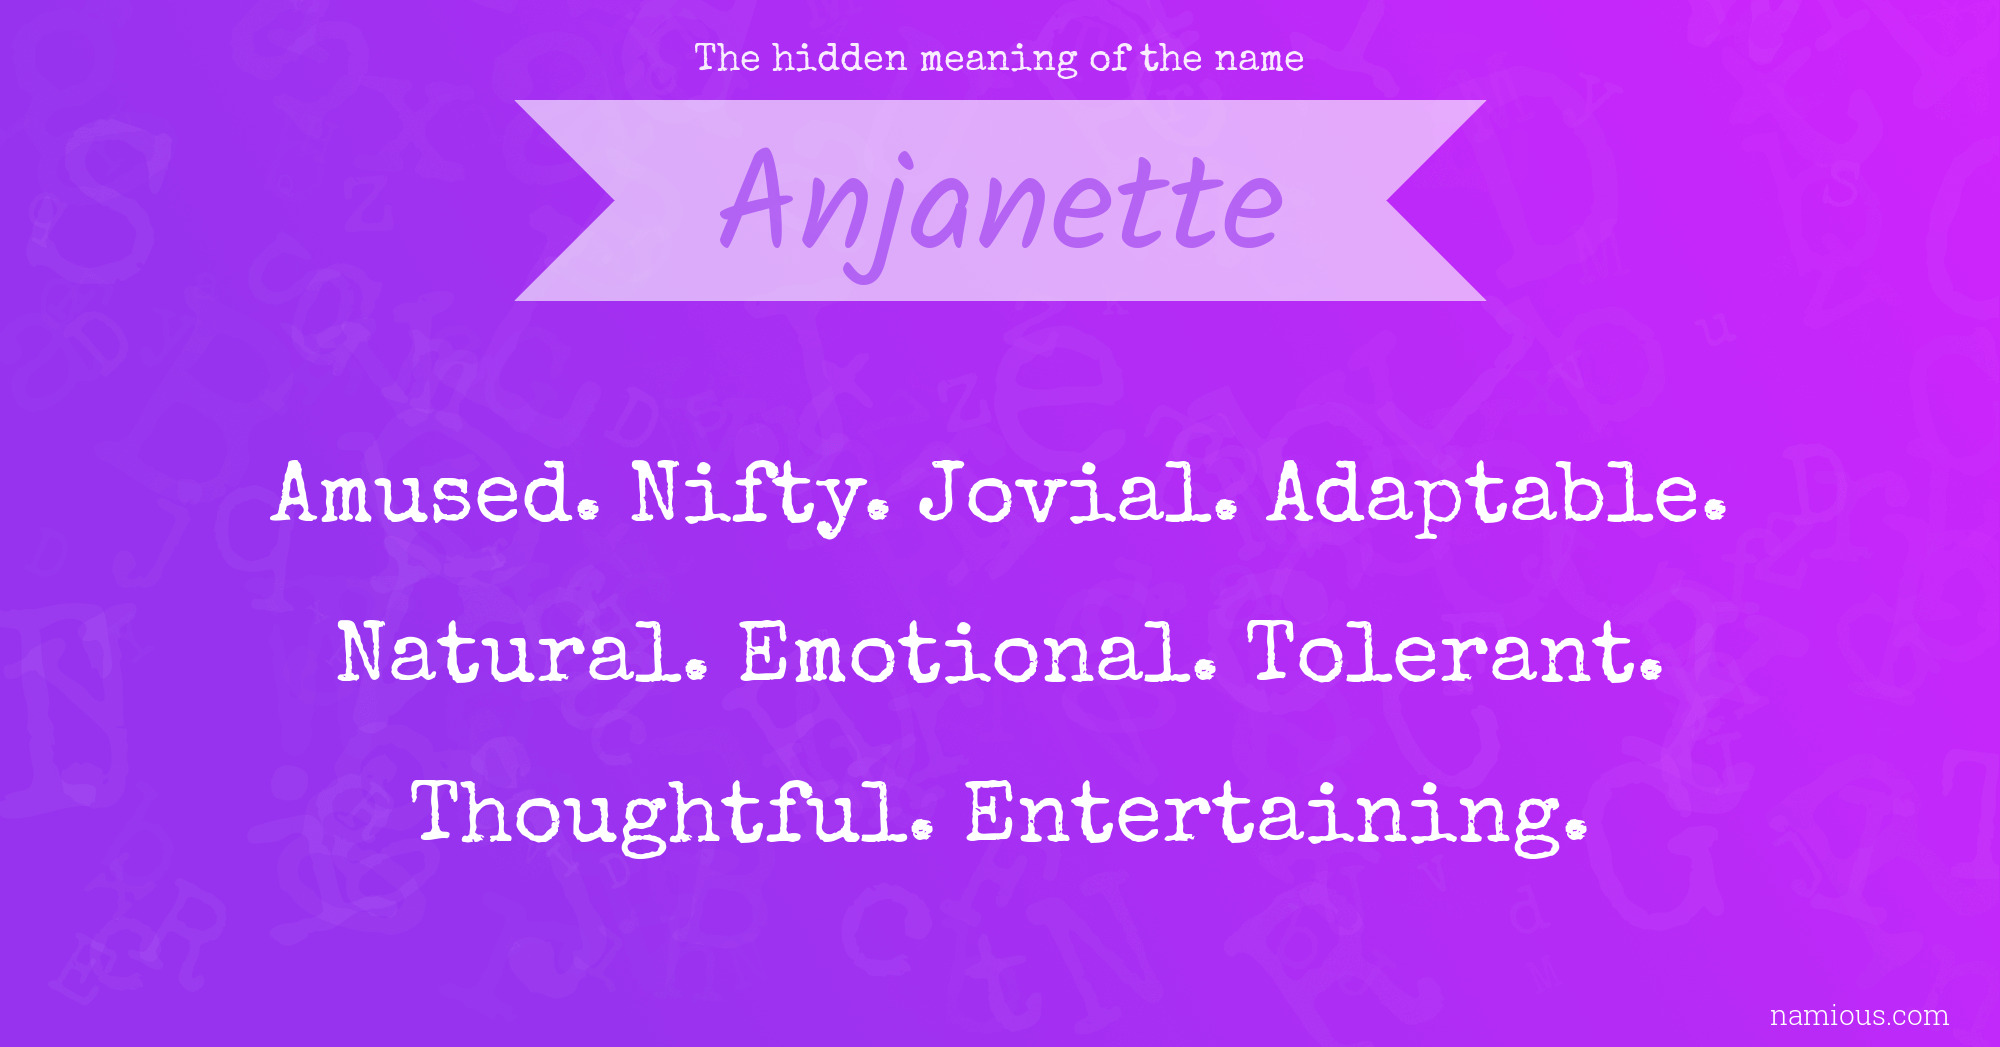 The hidden meaning of the name Anjanette